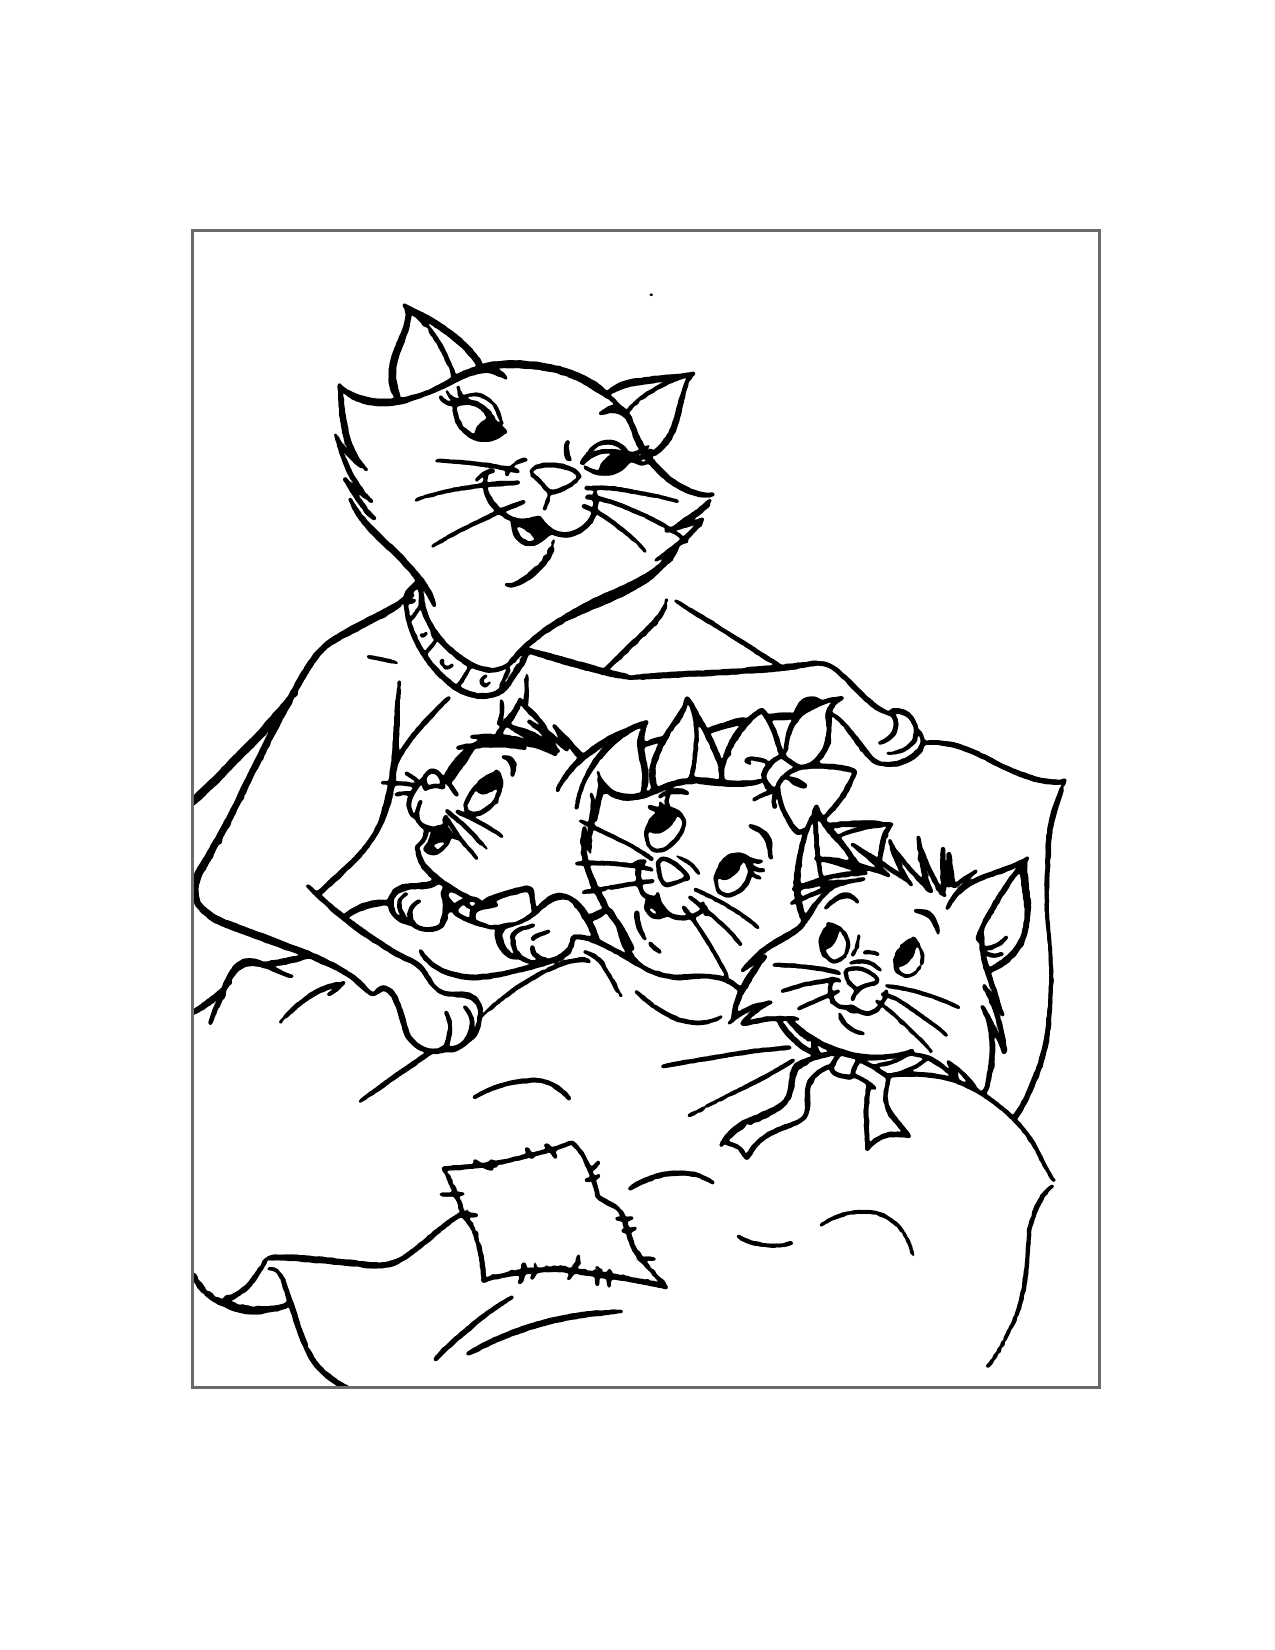 Duchess Puts Her Babies To Bed Coloring Page